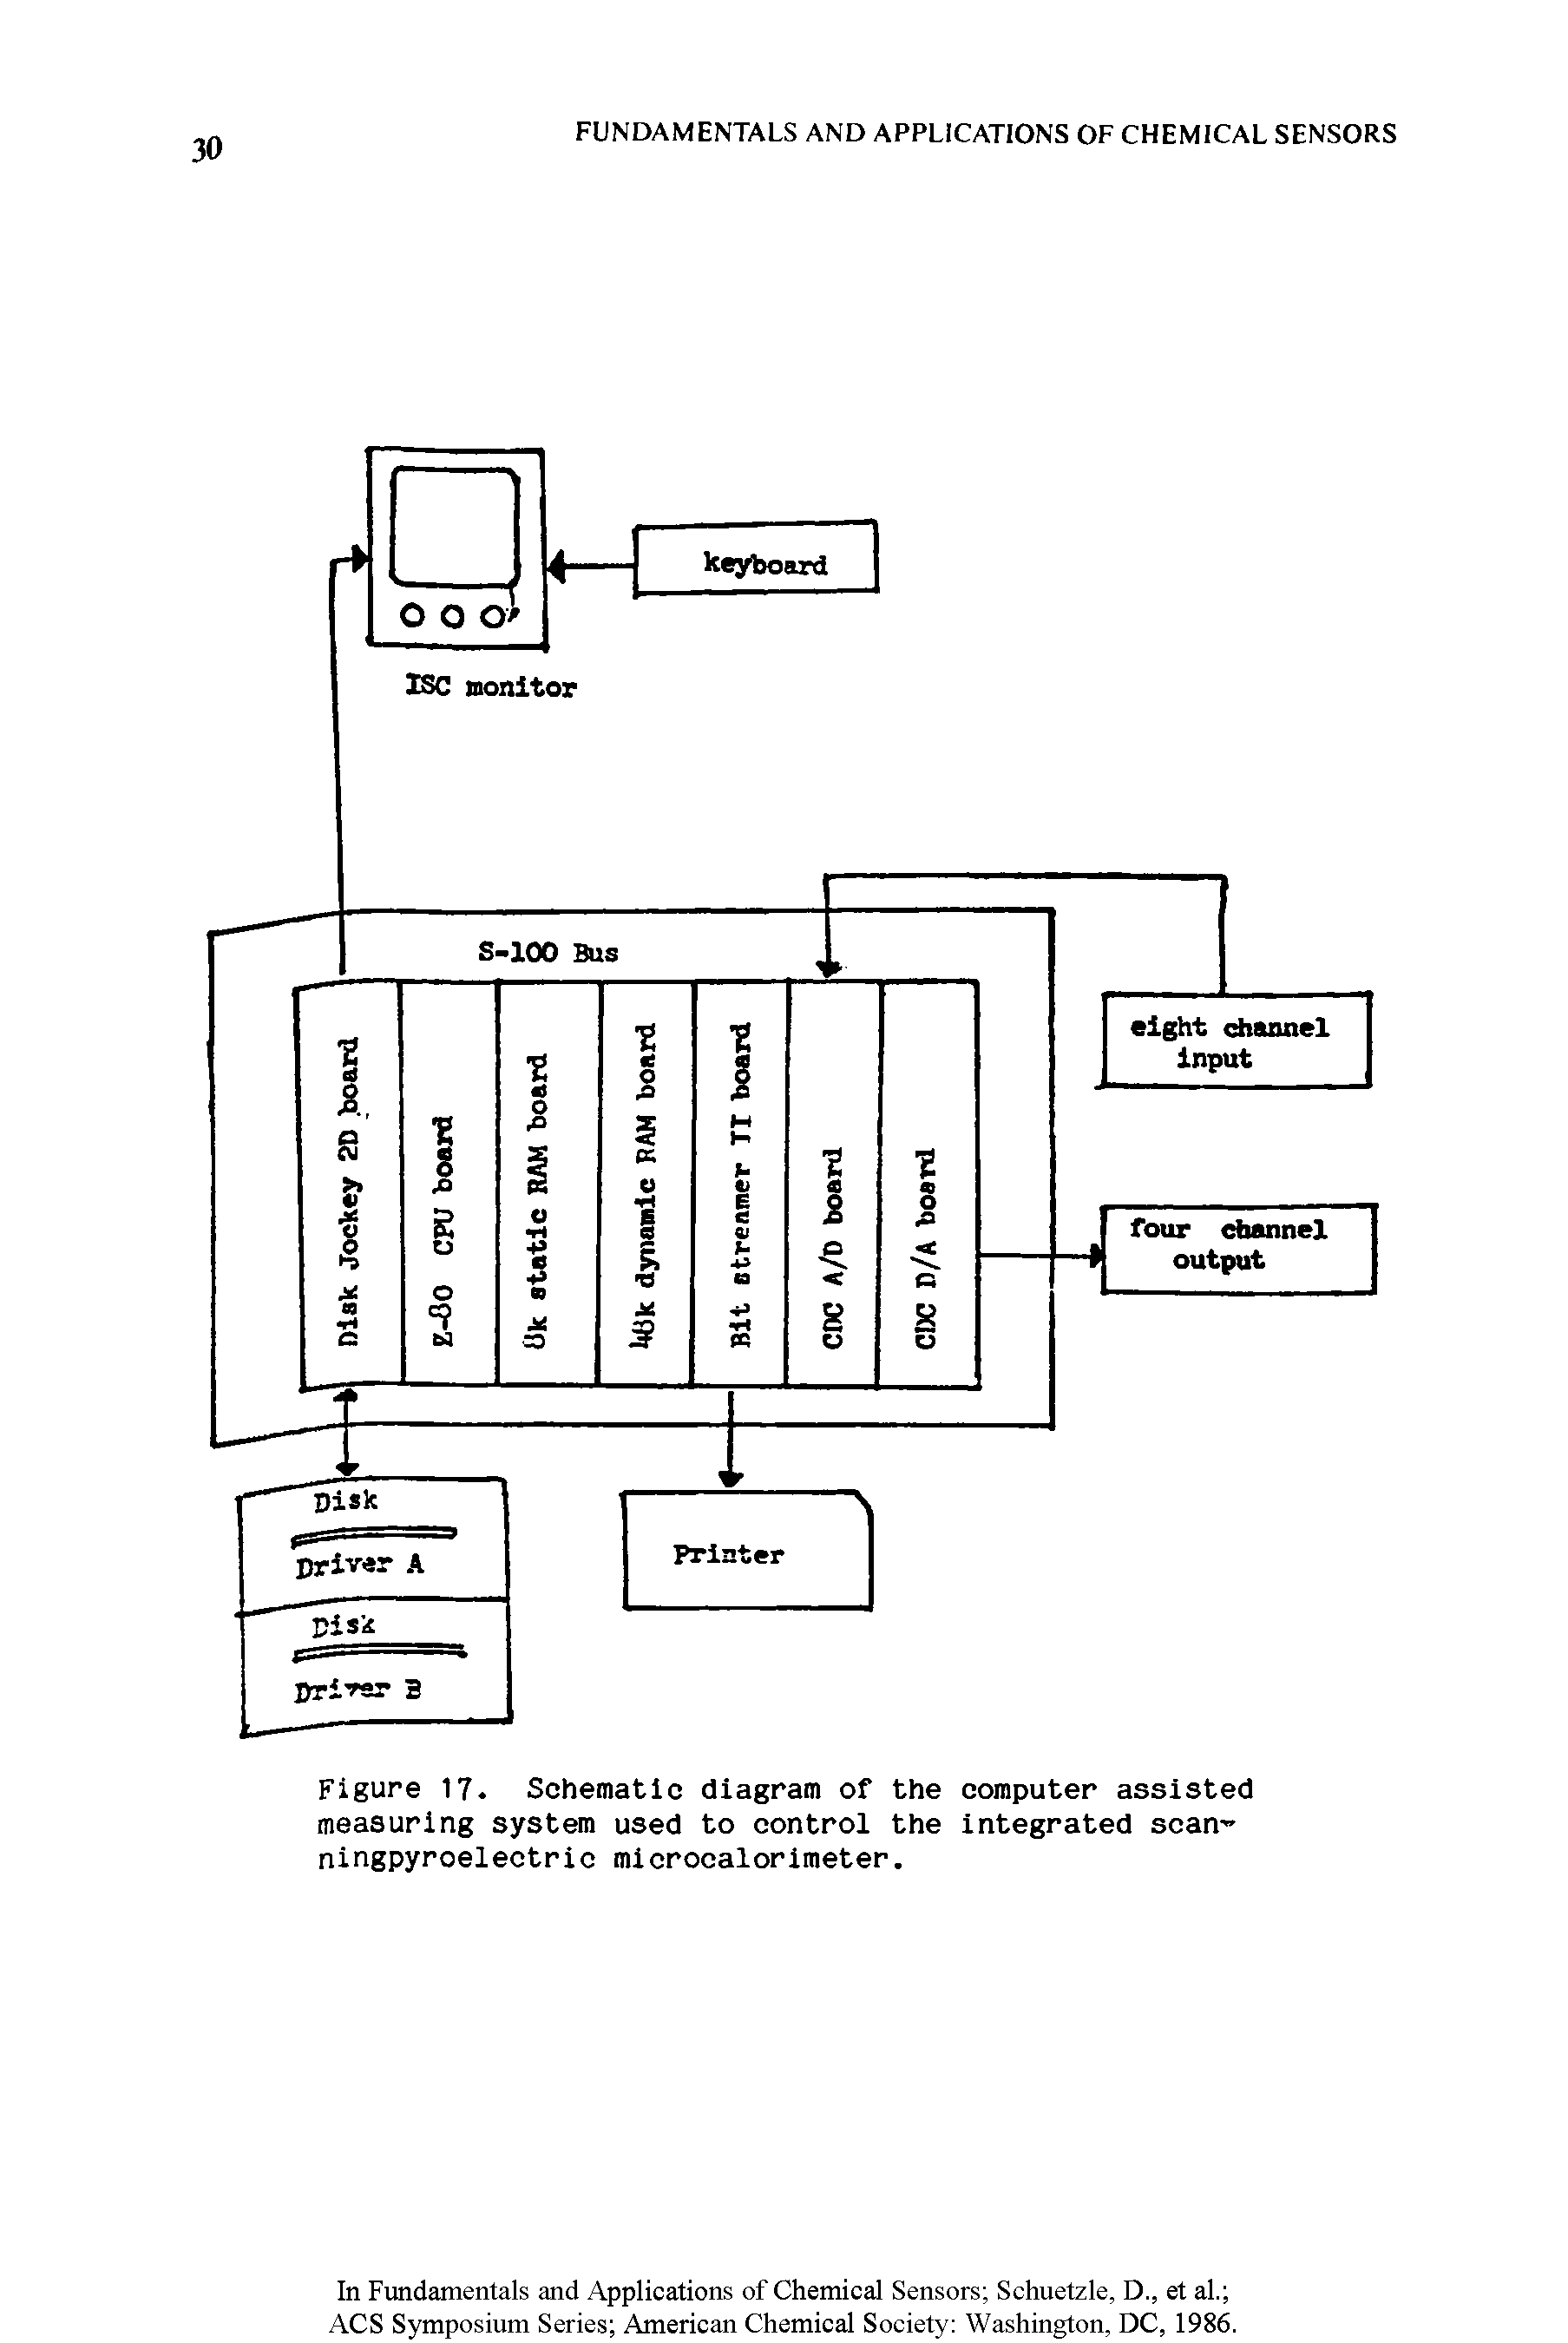 Figure 17. Schematic diagram of the computer assisted measuring system used to control the integrated scan -ningpyroelectric microcalorimeter.